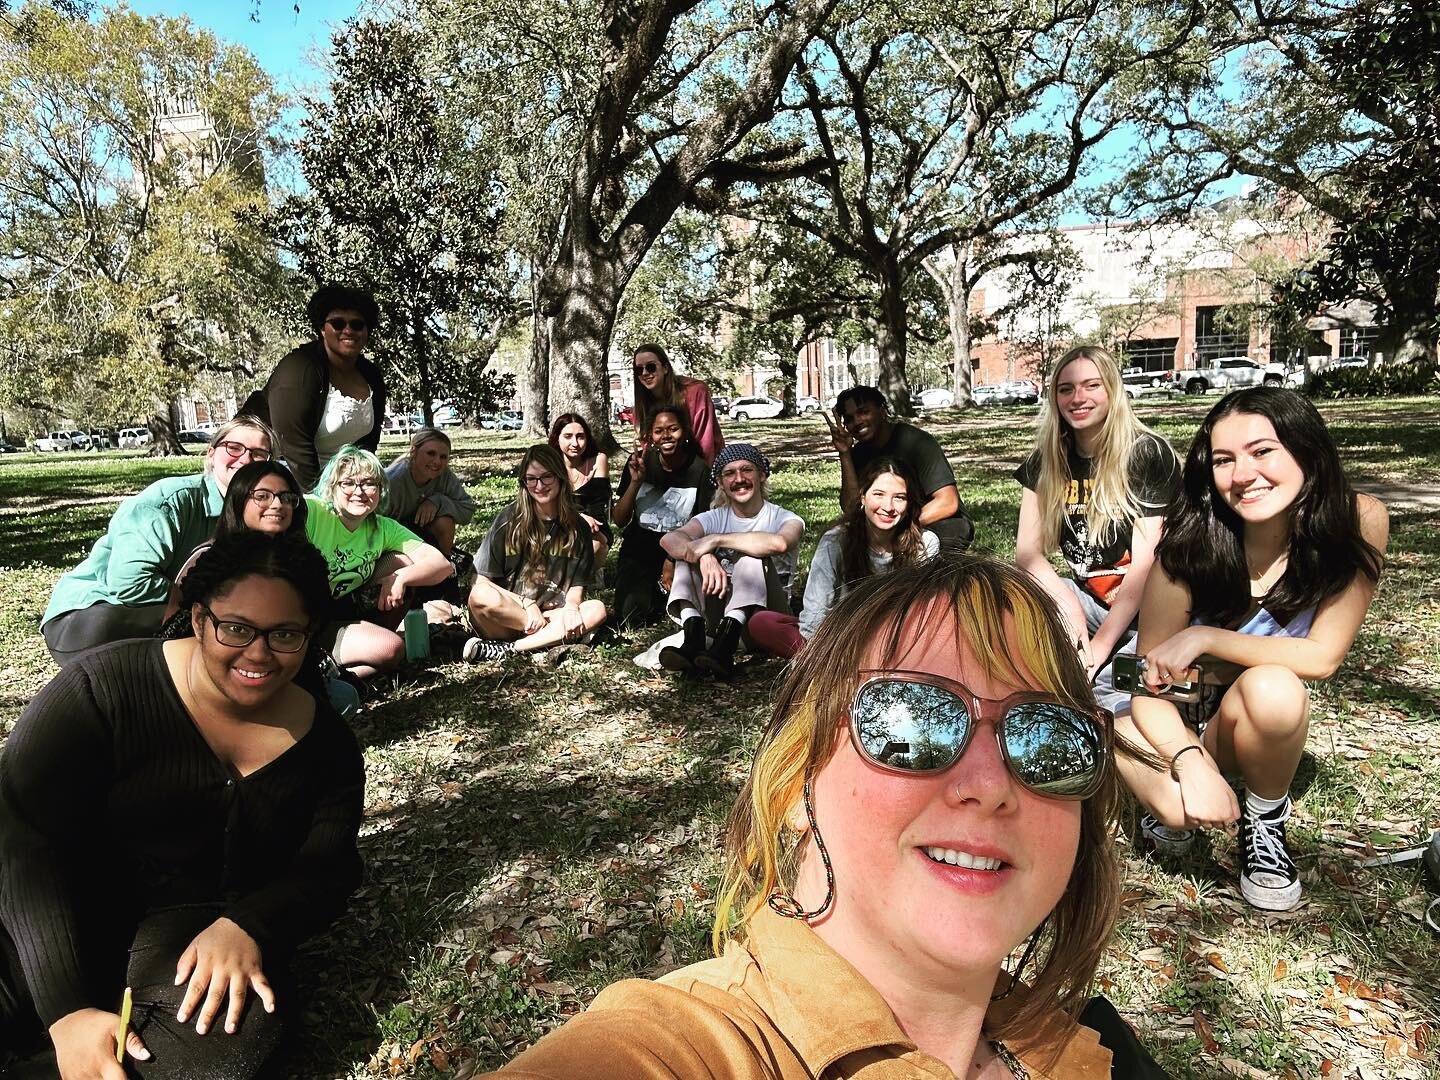 My Women in Electronic Music class enjoying a beautiful day in New Orleans performing Pauline Oliveros&rsquo; Sonic Meditations.
#deeplistening #paulineoliveros #womeninelectronicmusic #loyno #listening